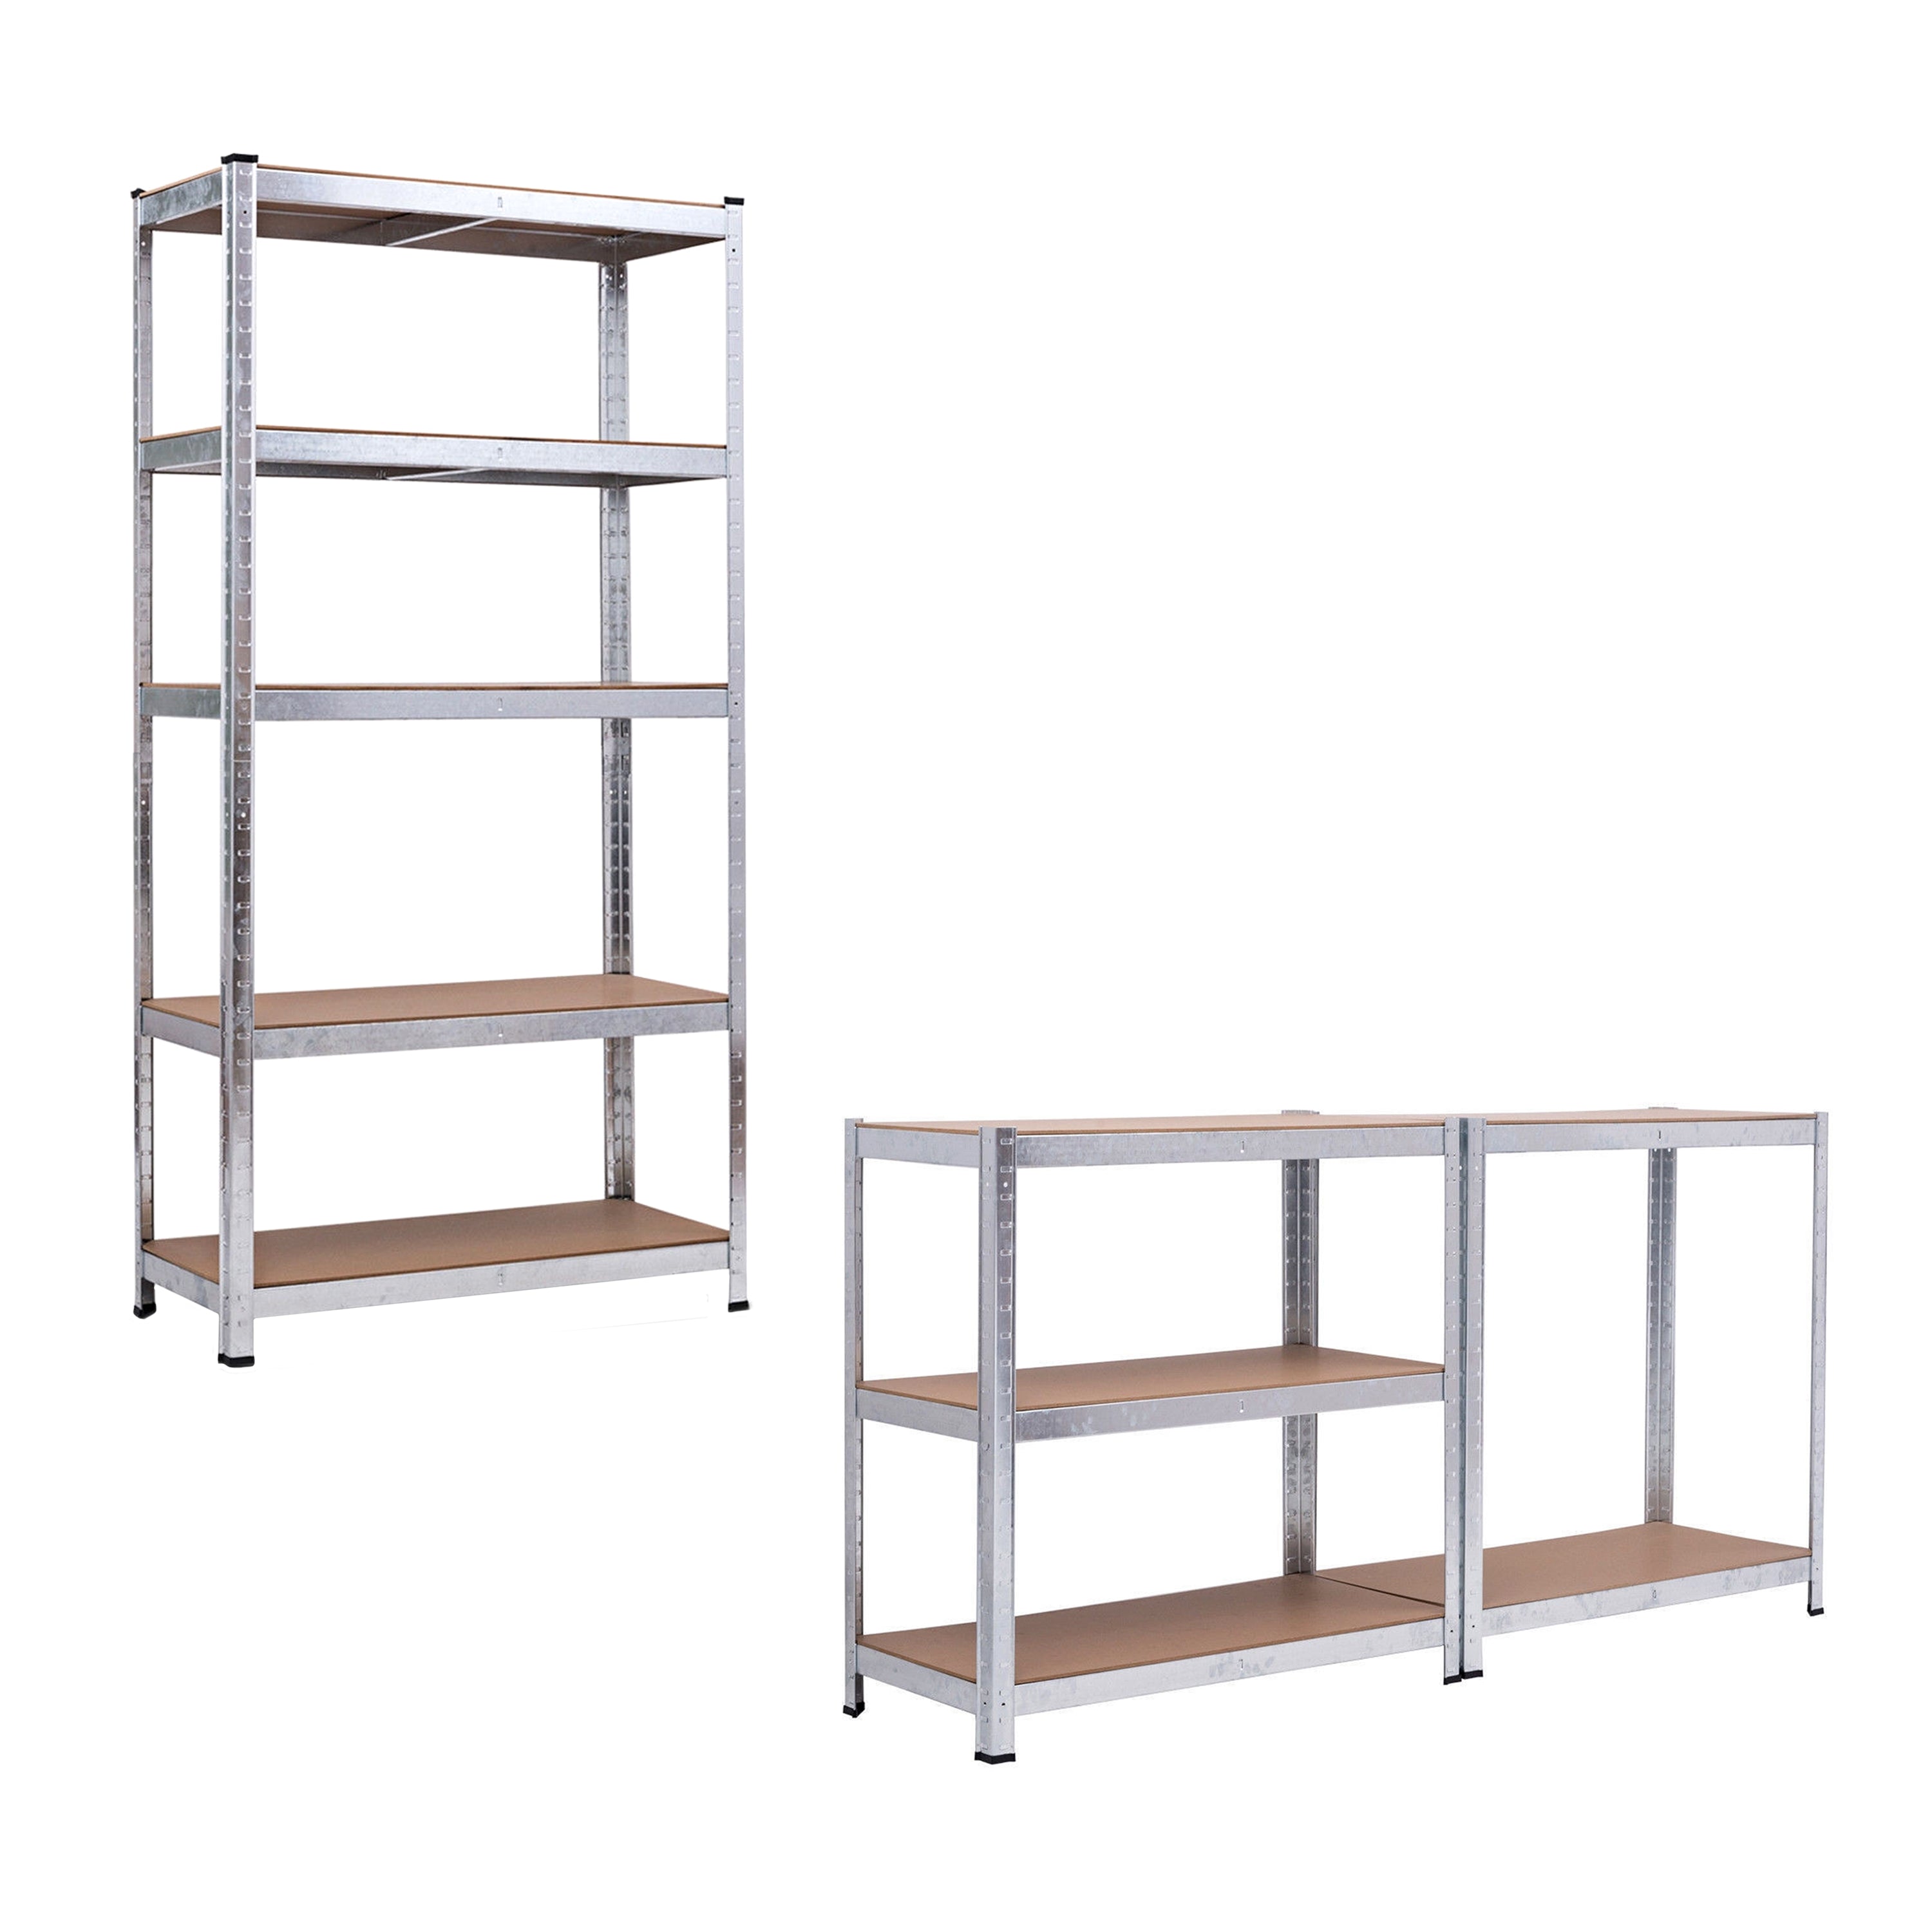 AMOS 5 Tier Heavy Duty Industrial Storage Shelving Units With Adjustable Shelf Height - Galvanized Steel or Black Powder Coated Frames